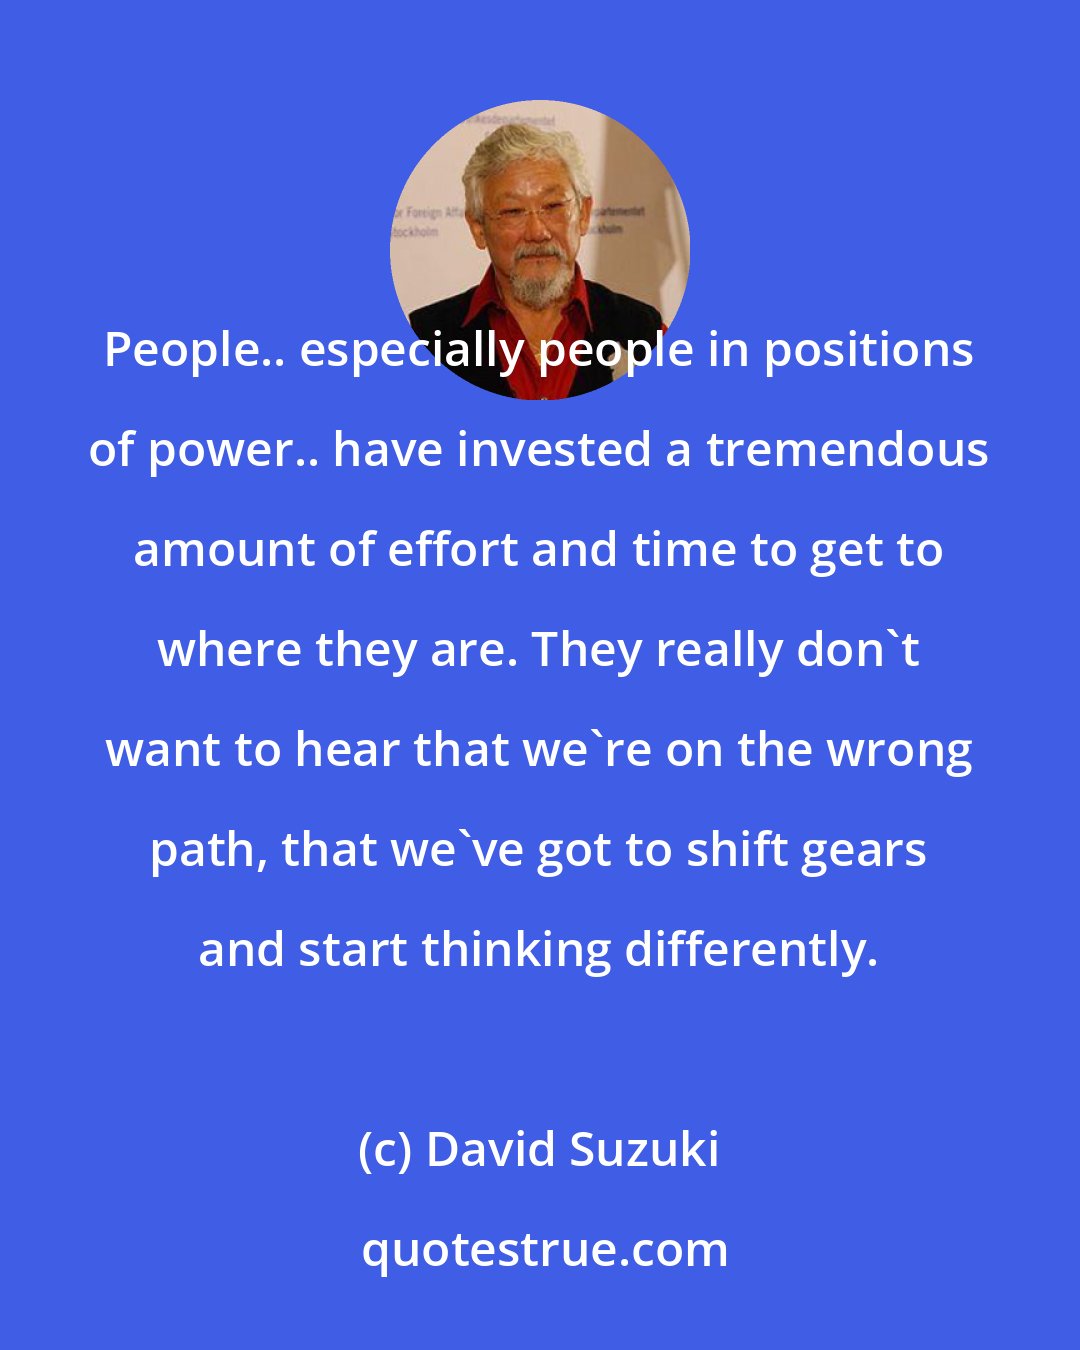 David Suzuki: People.. especially people in positions of power.. have invested a tremendous amount of effort and time to get to where they are. They really don't want to hear that we're on the wrong path, that we've got to shift gears and start thinking differently.